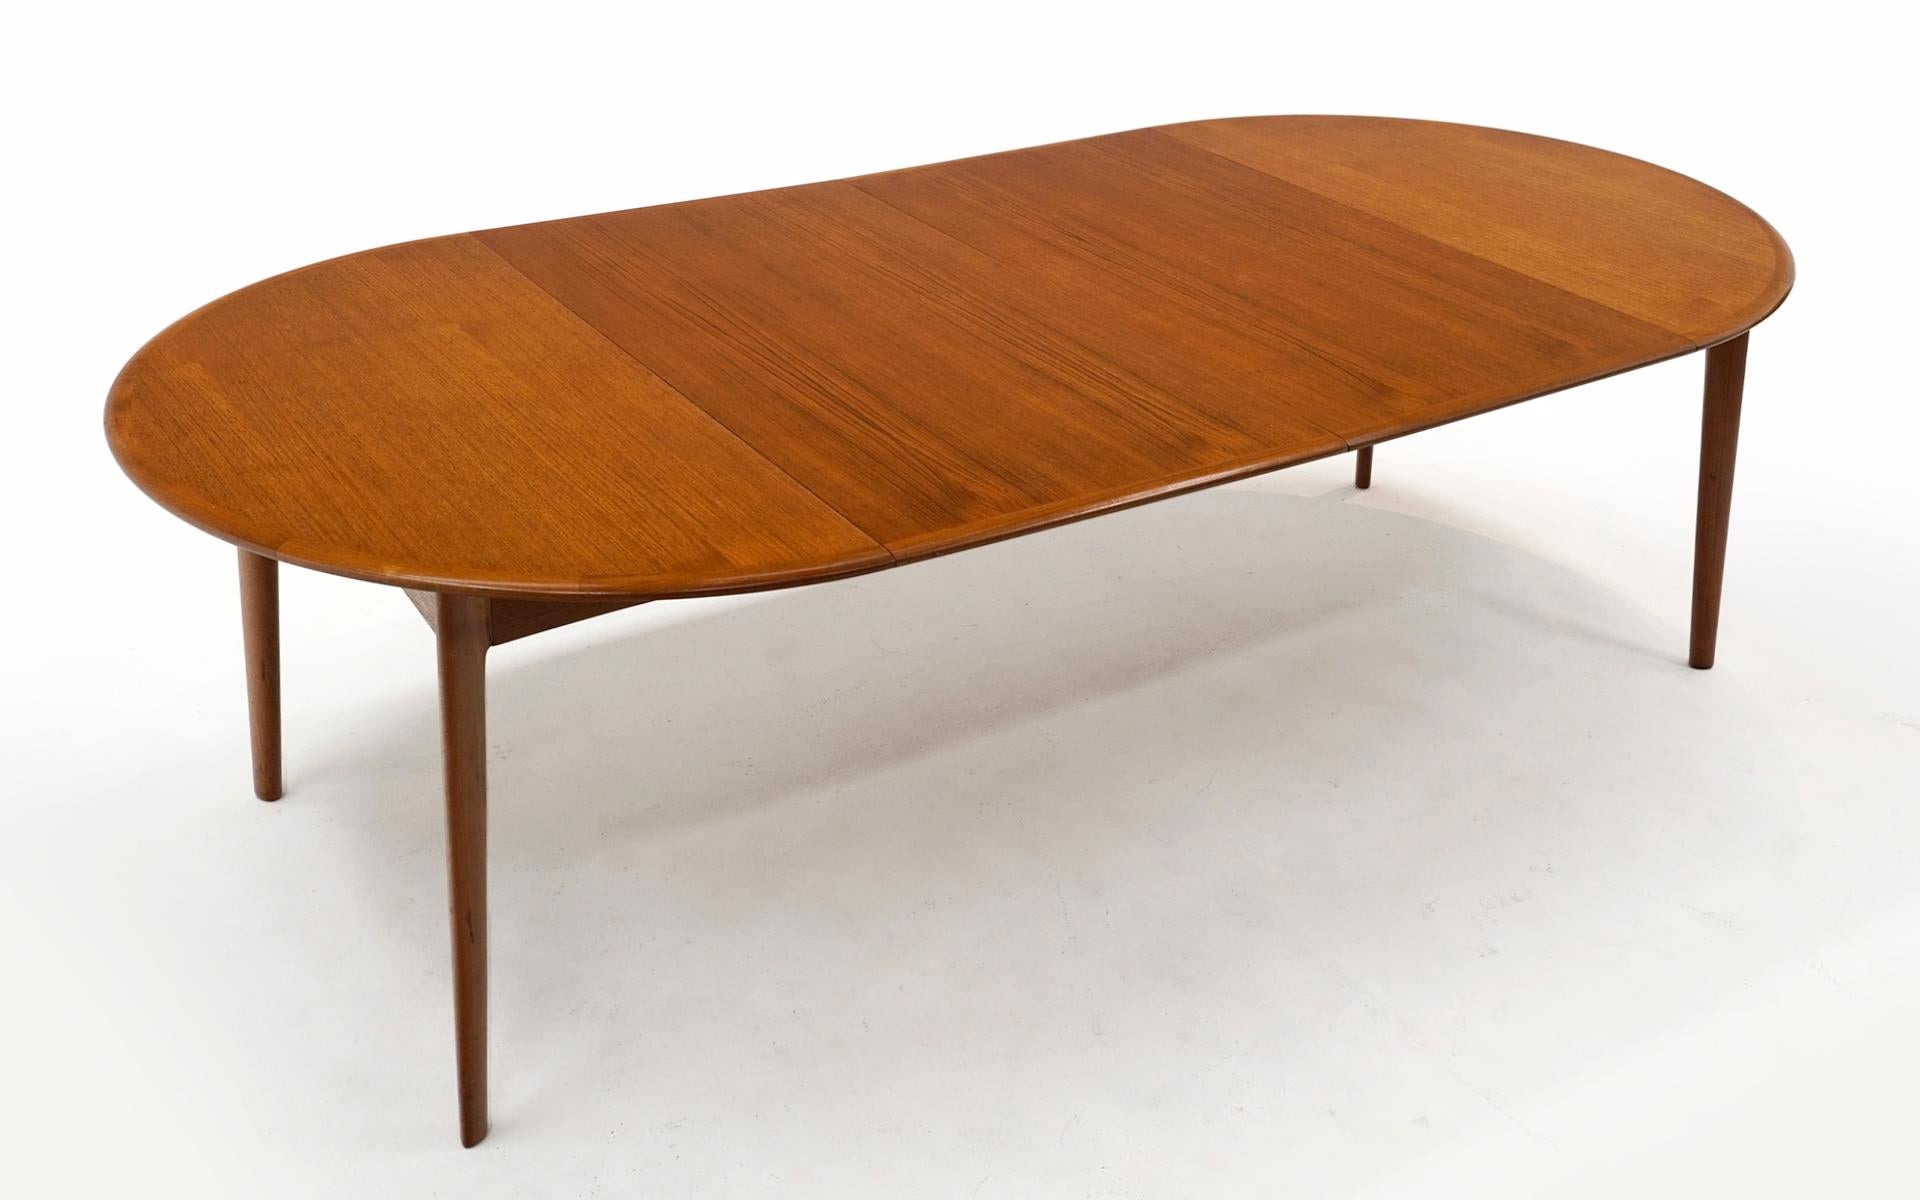 Scandinavian Modern Round Expandable Danish Modern Teak Dining Table with Two Leaves, 1962, Original